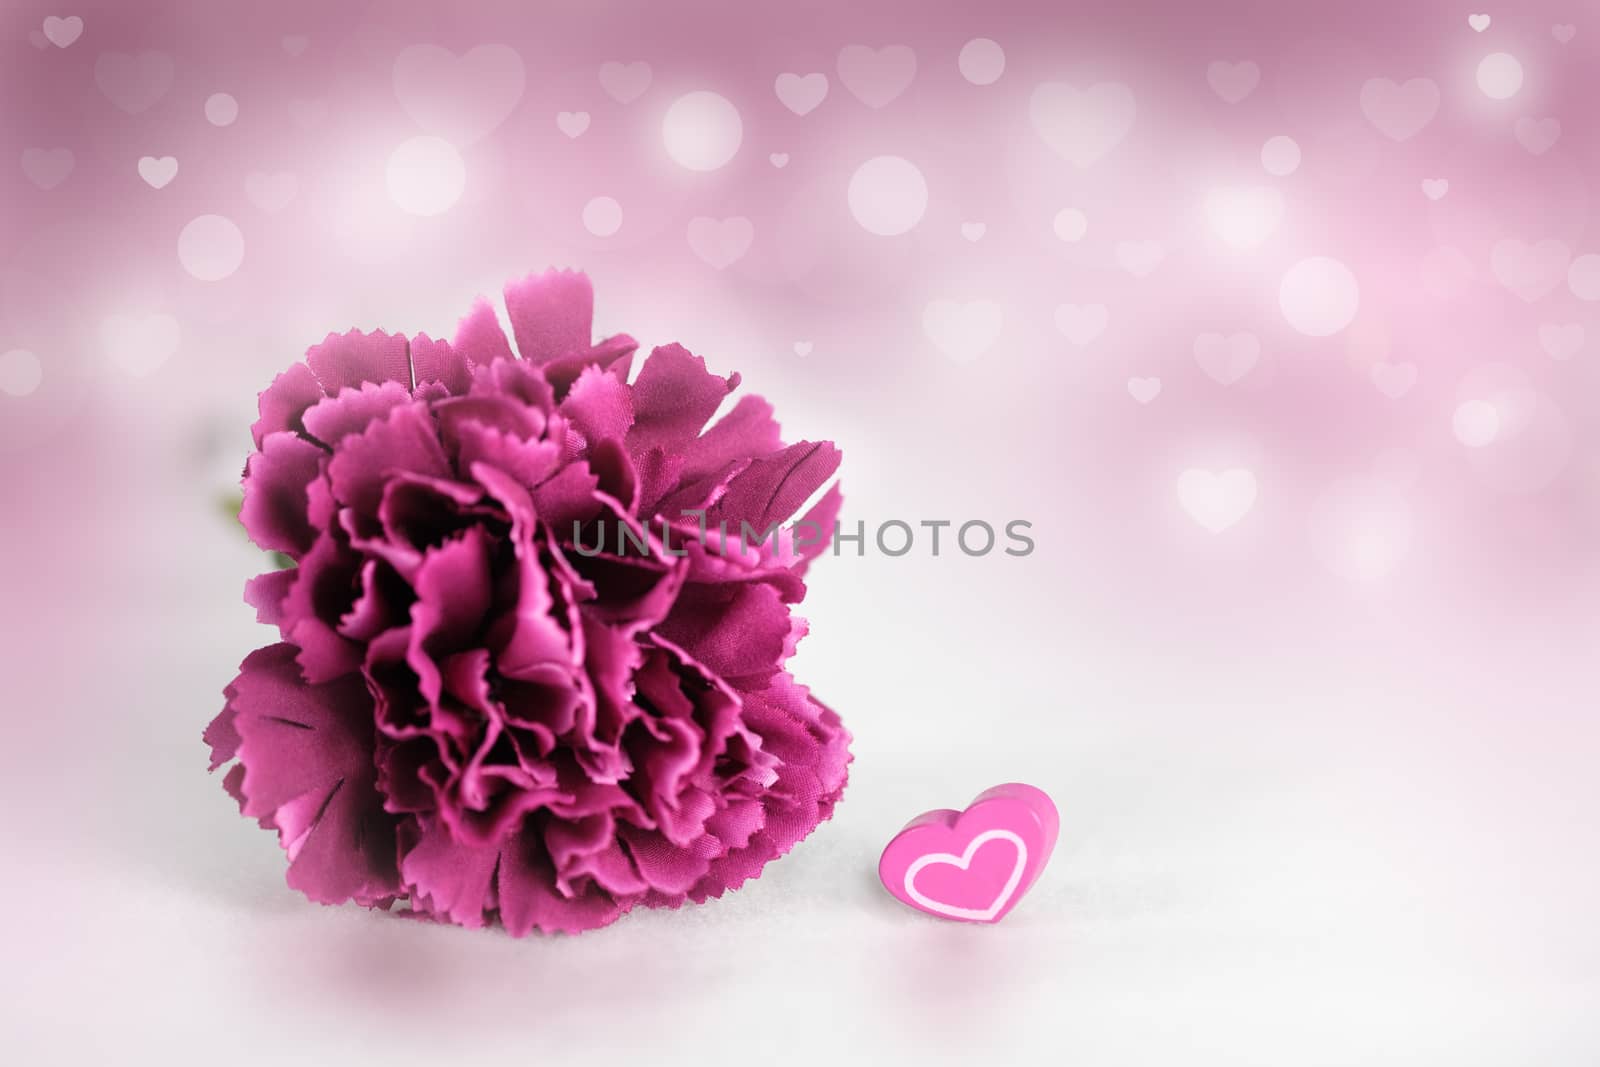 The pink carnation on abstract bokeh background in love concept for valentines day with romantic moment.